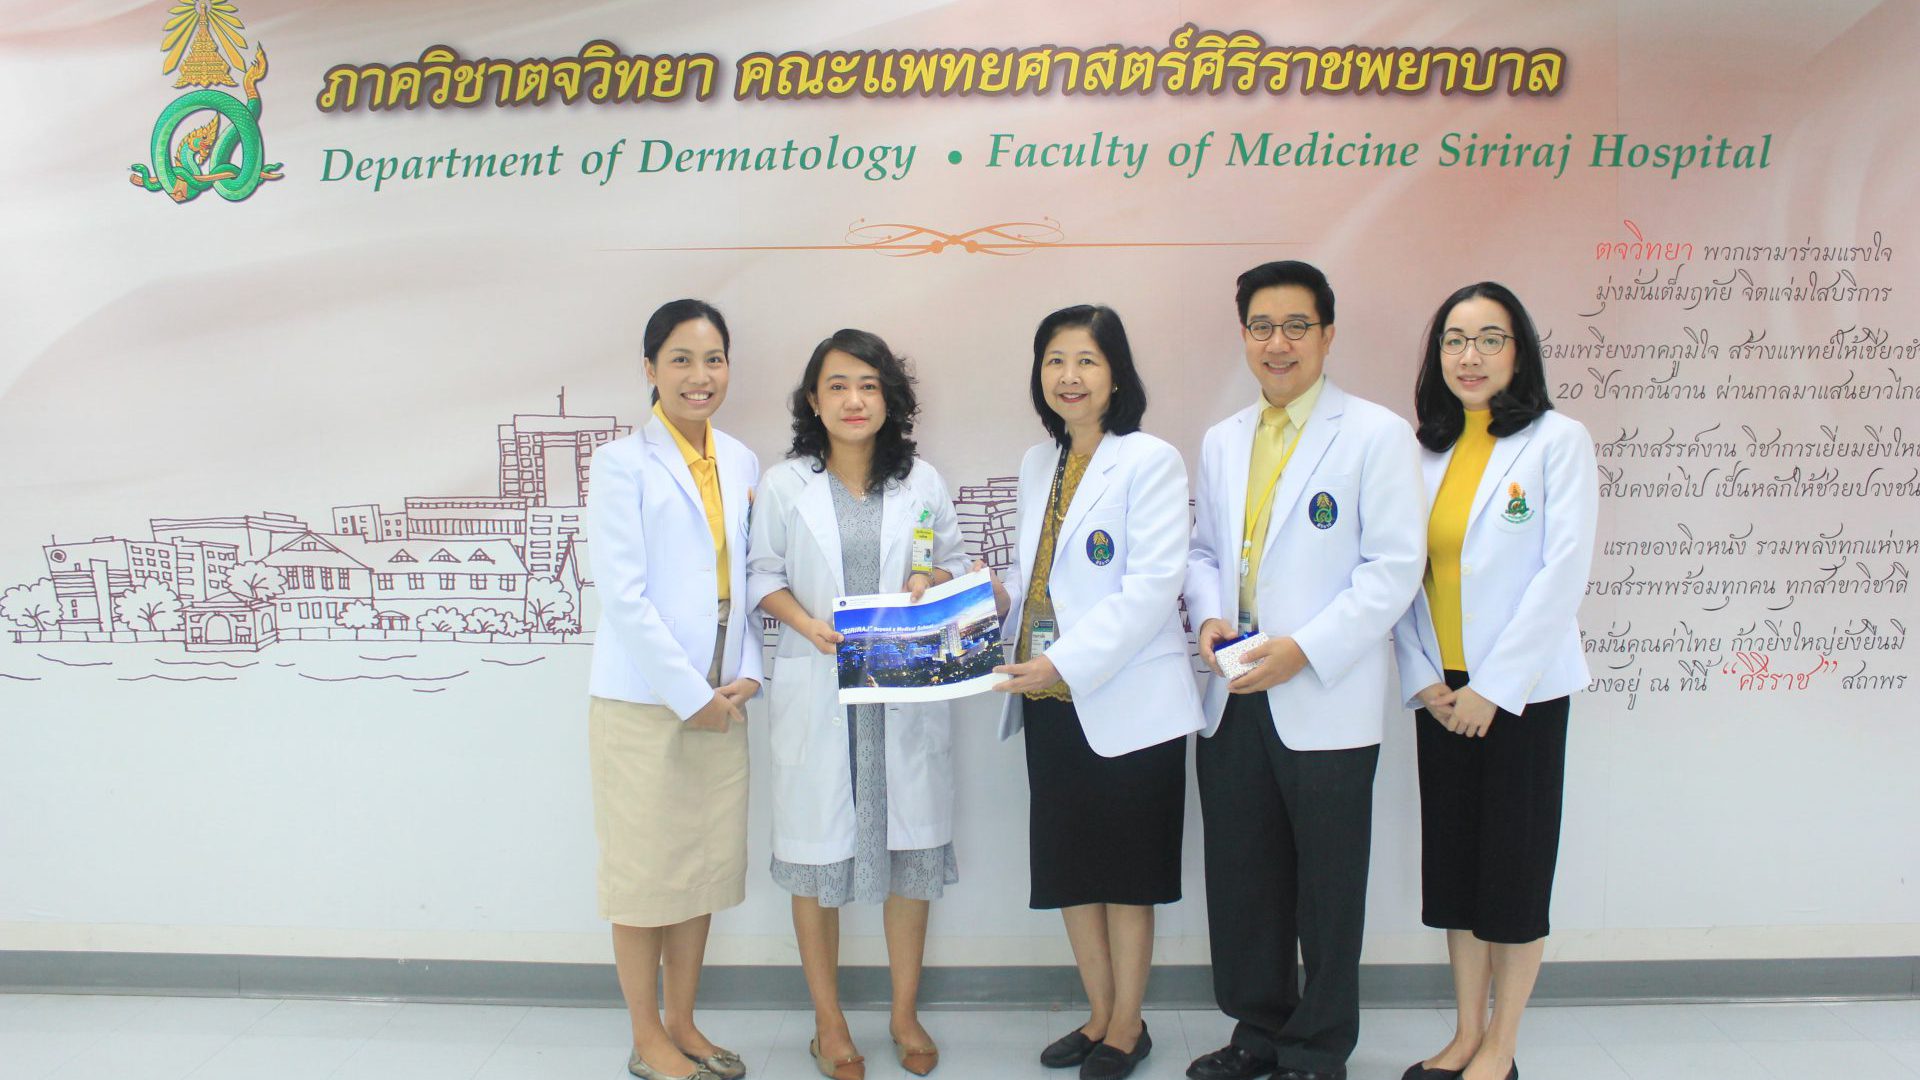 Certification Ceremony for ASEAN Doctors and Developing Countries Scholarship